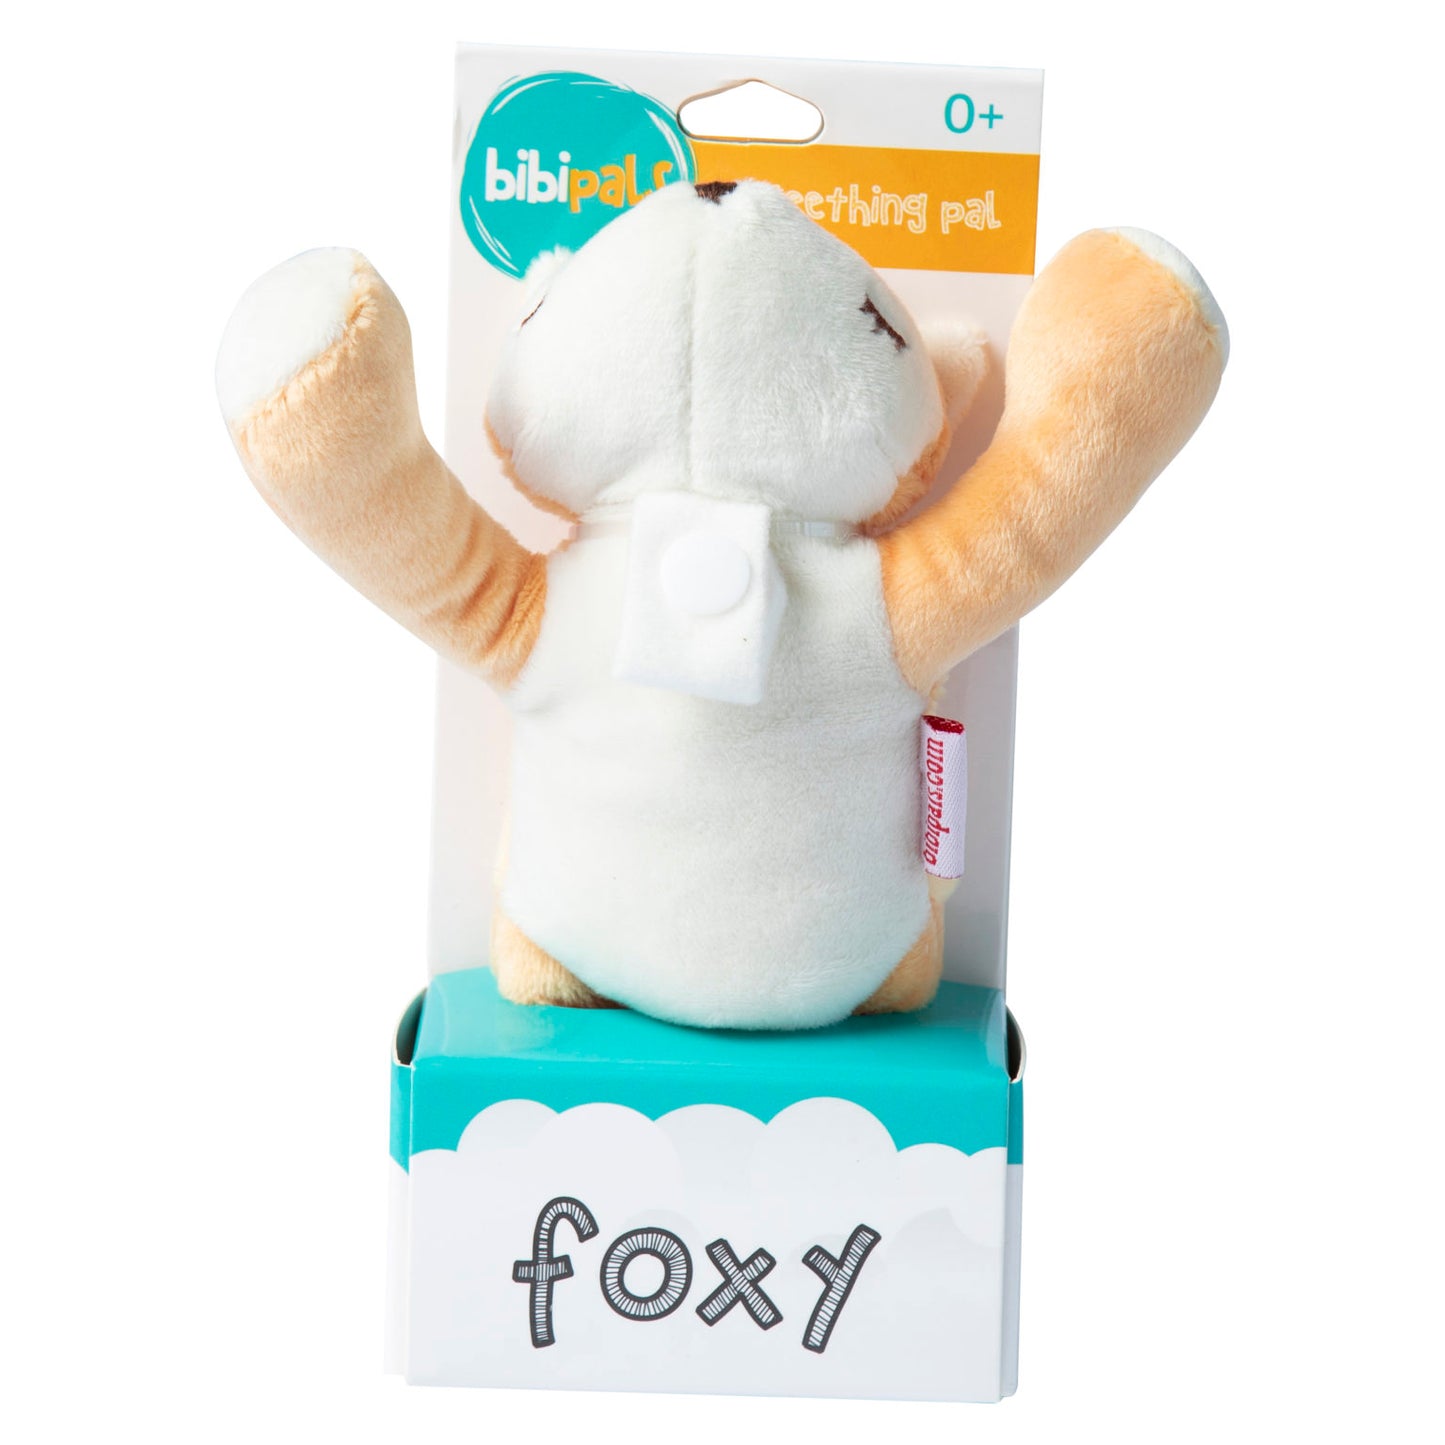 Bibipals Teething & Pacifier Snuggle Toy